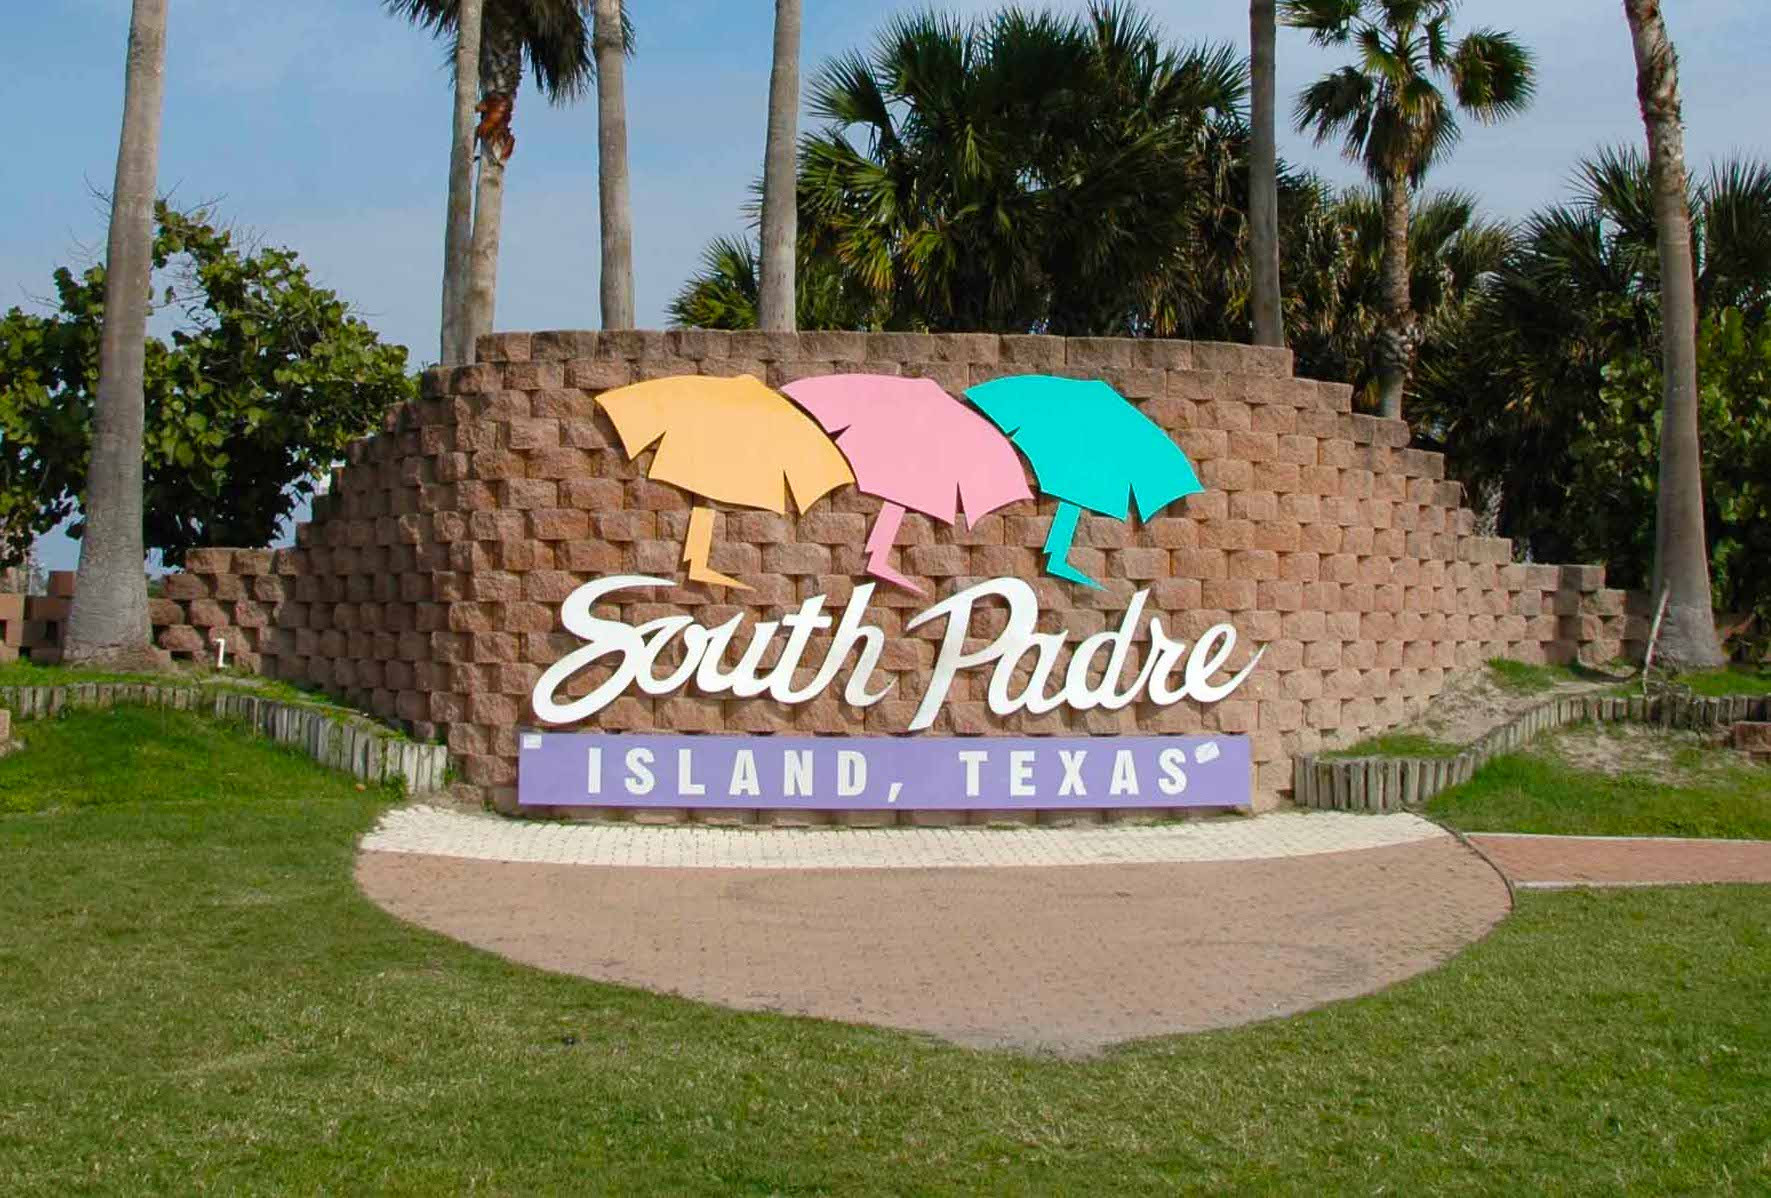 south padre island welcome sign